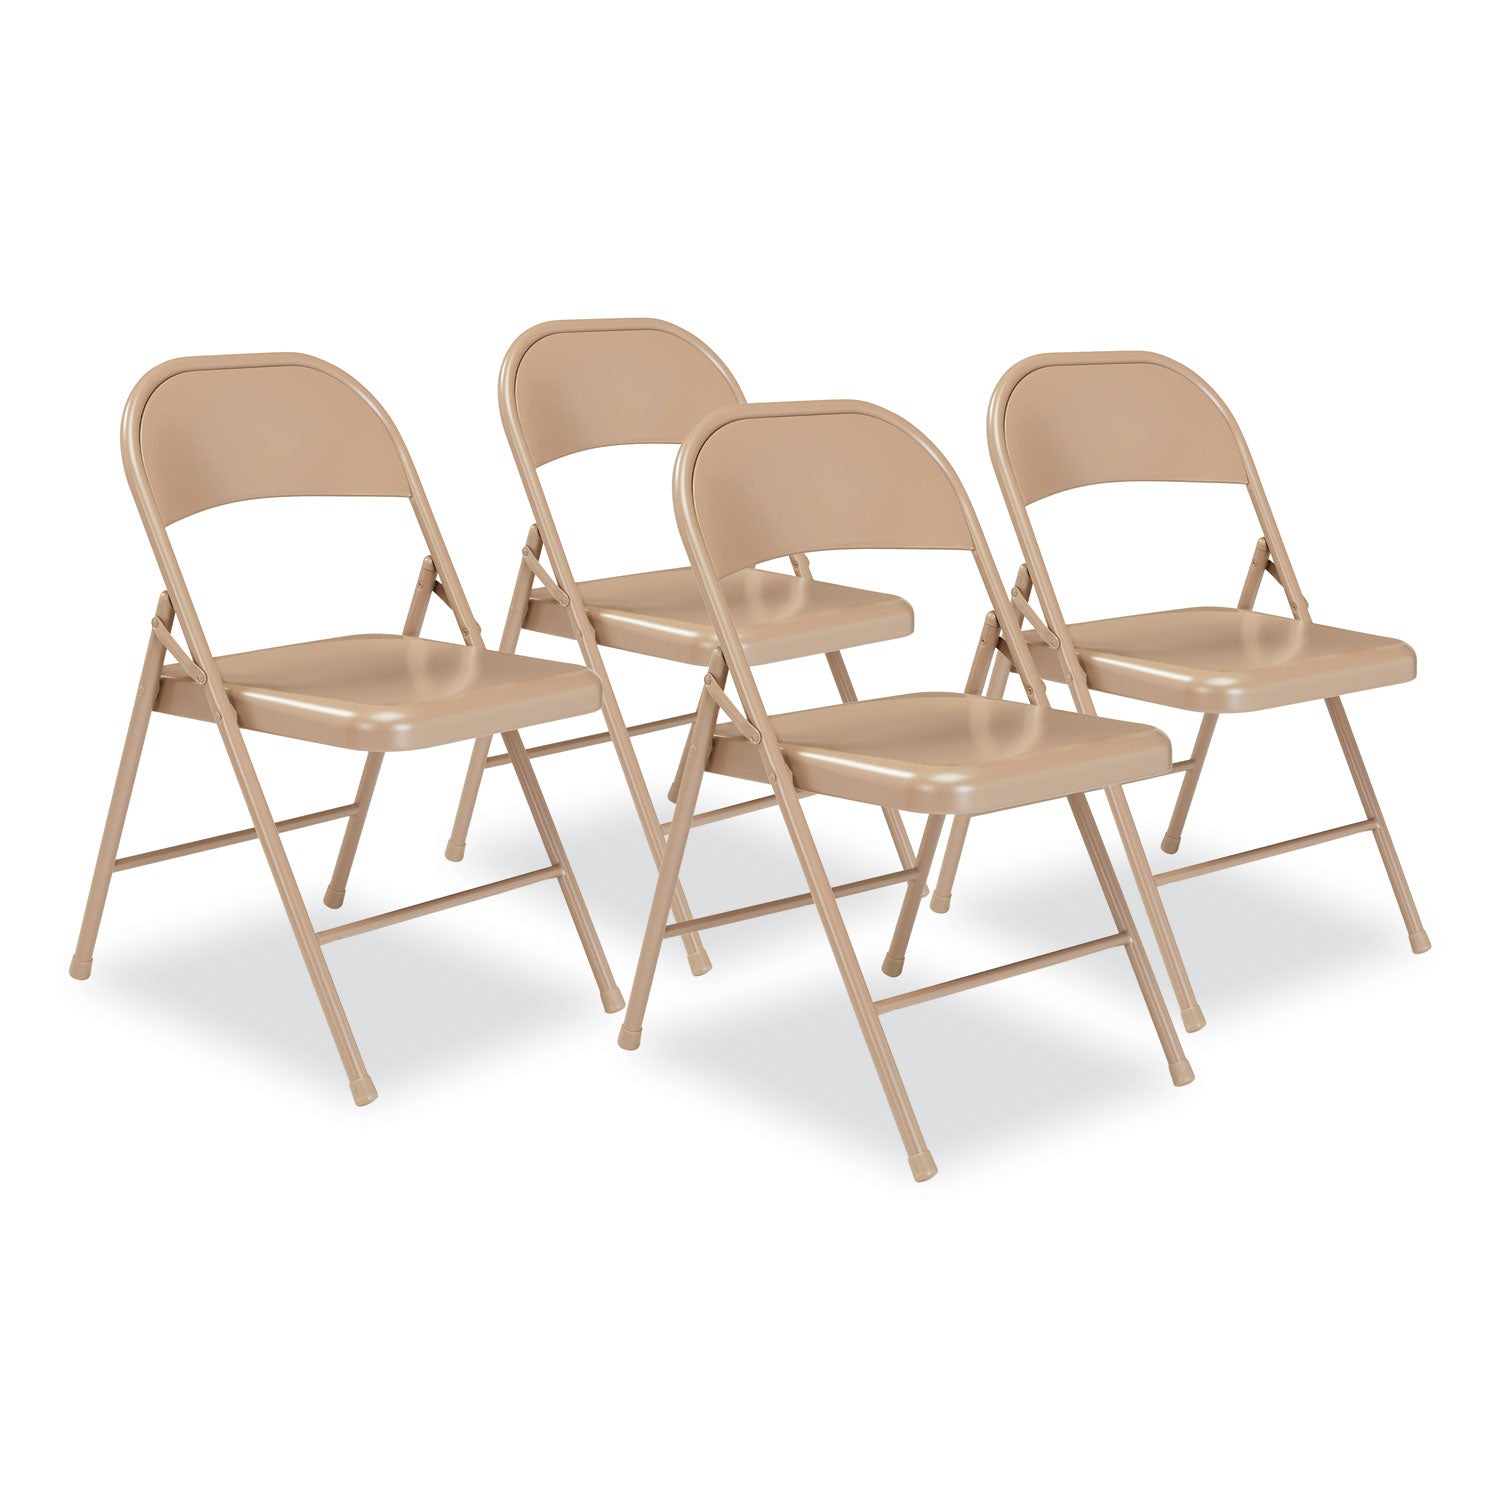 900-series-all-steel-folding-chair-supports-250lb-1775-seat-height-beige-seat-back-base-4-ctships-in-1-3-business-days_nps901 - 1